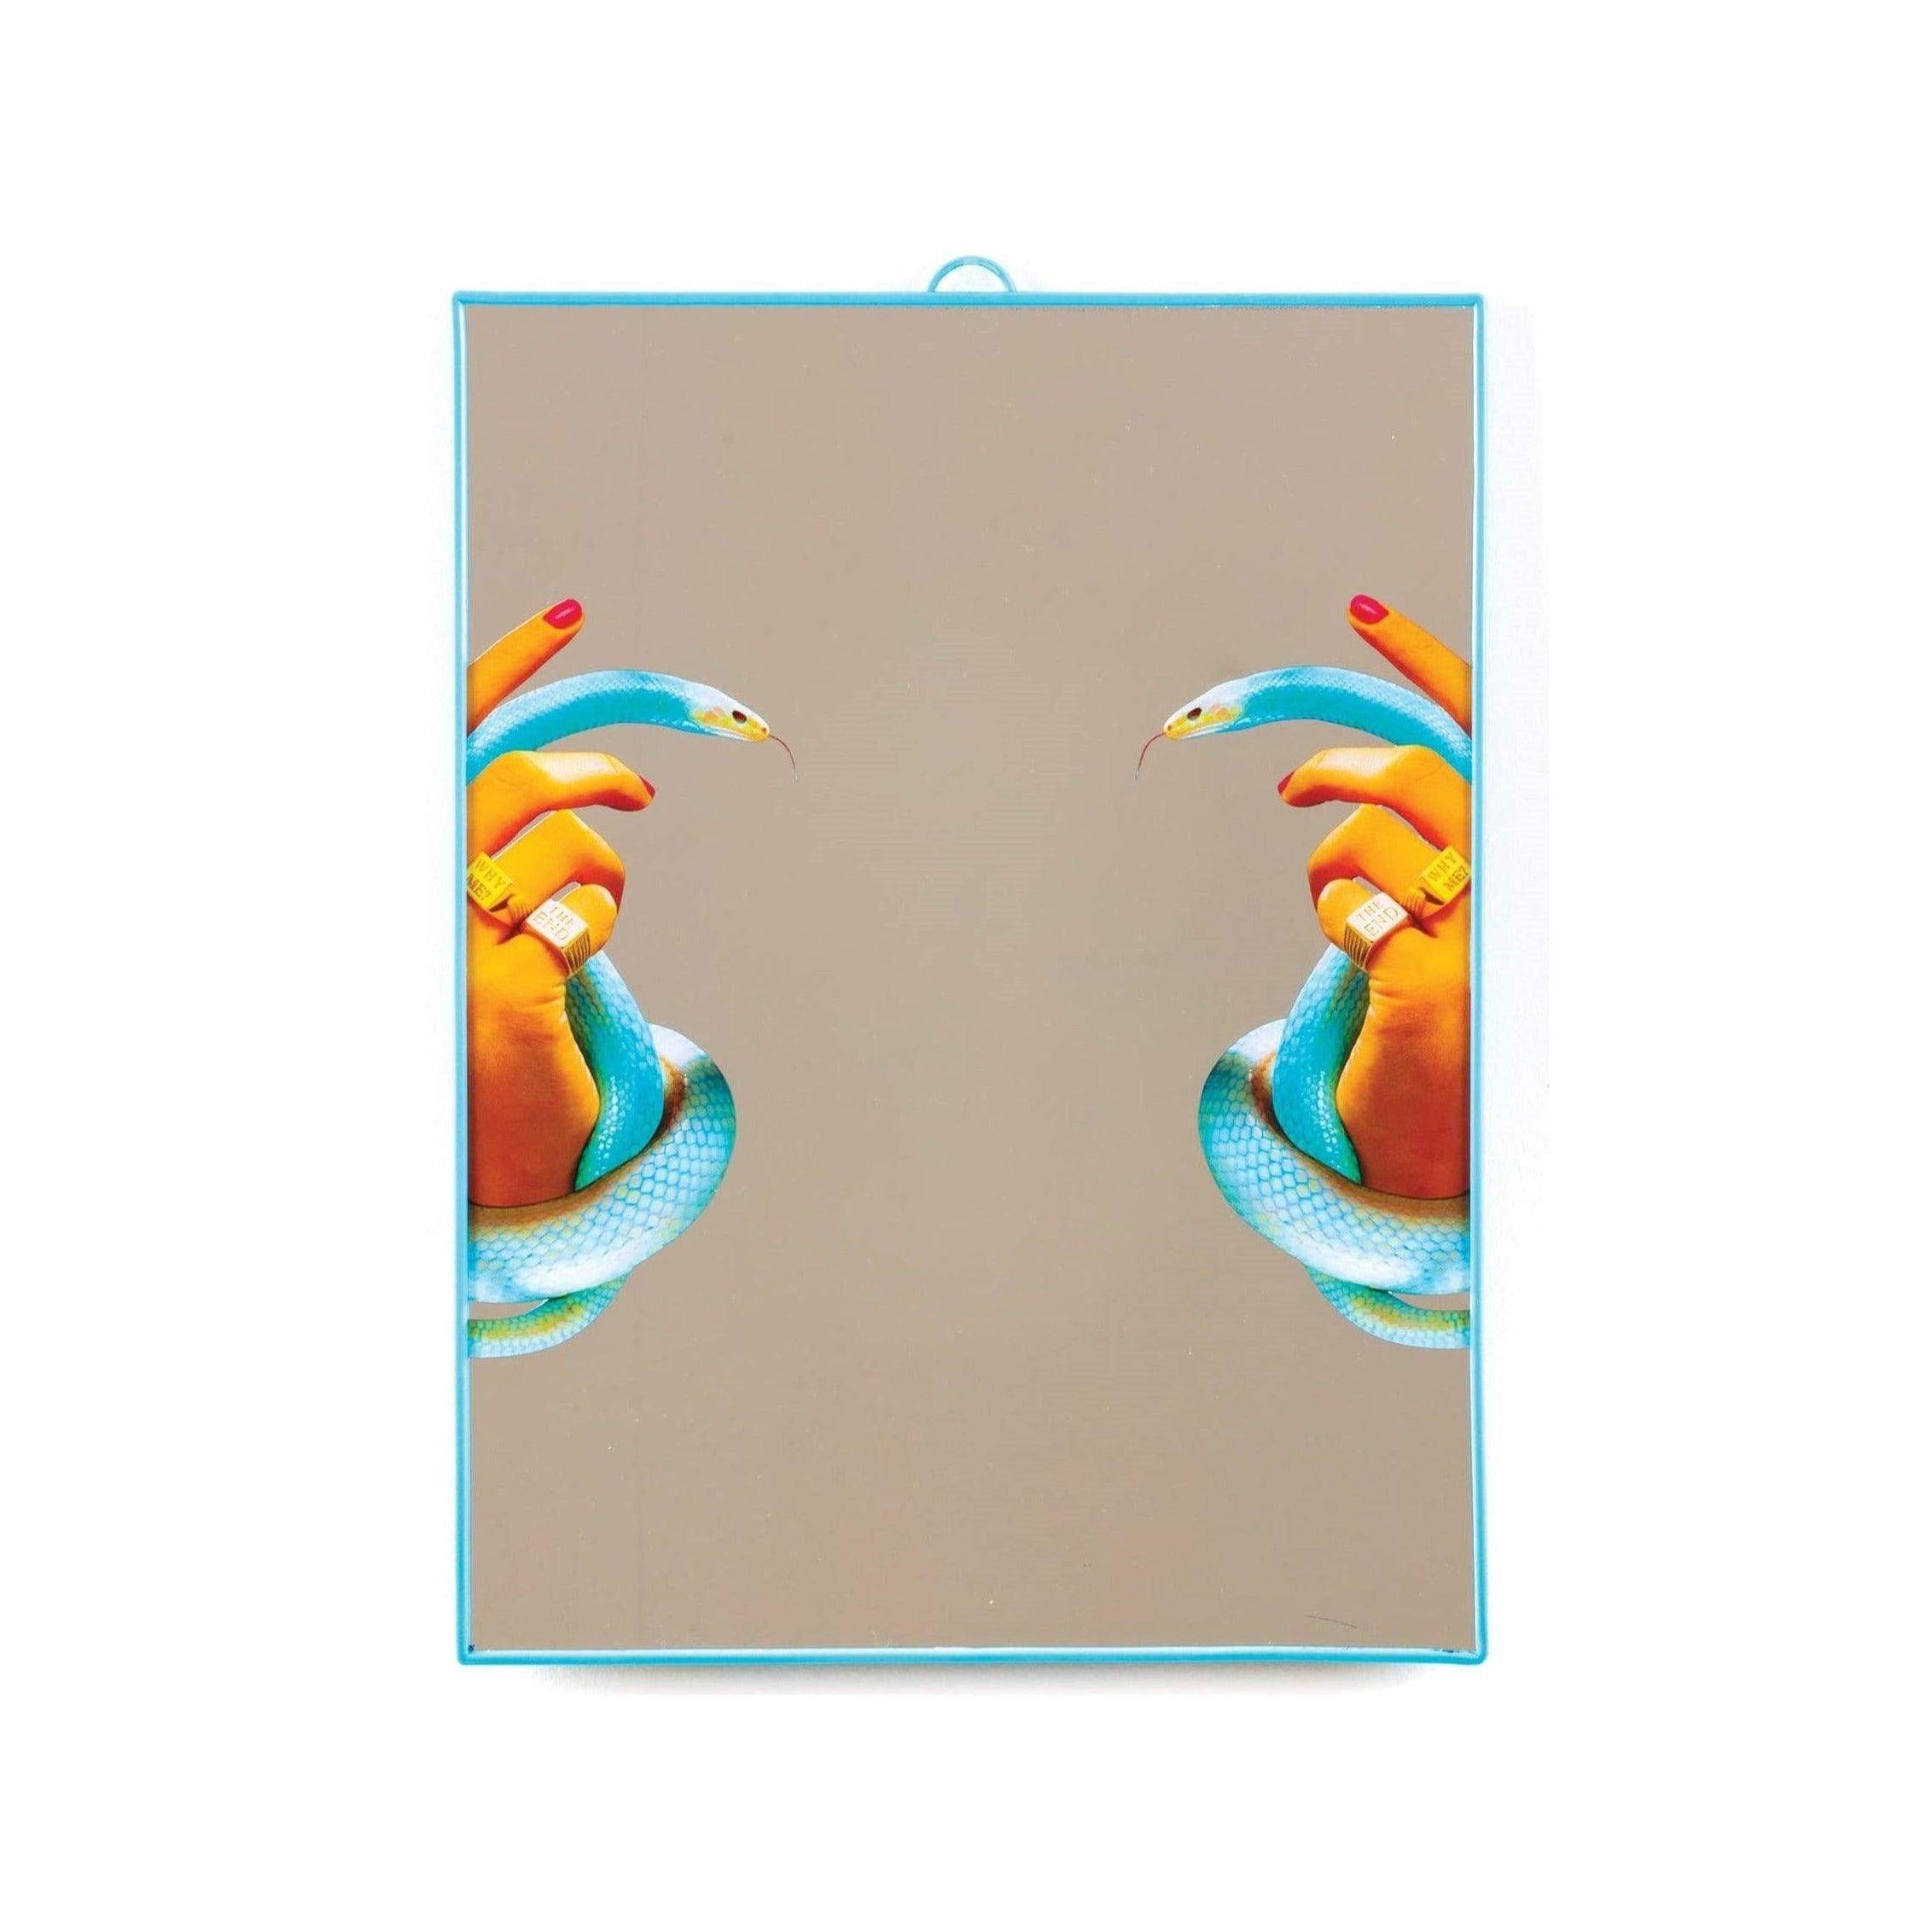 Mirror HANDS WITH SNAKES in a blue frame - Eye on Design